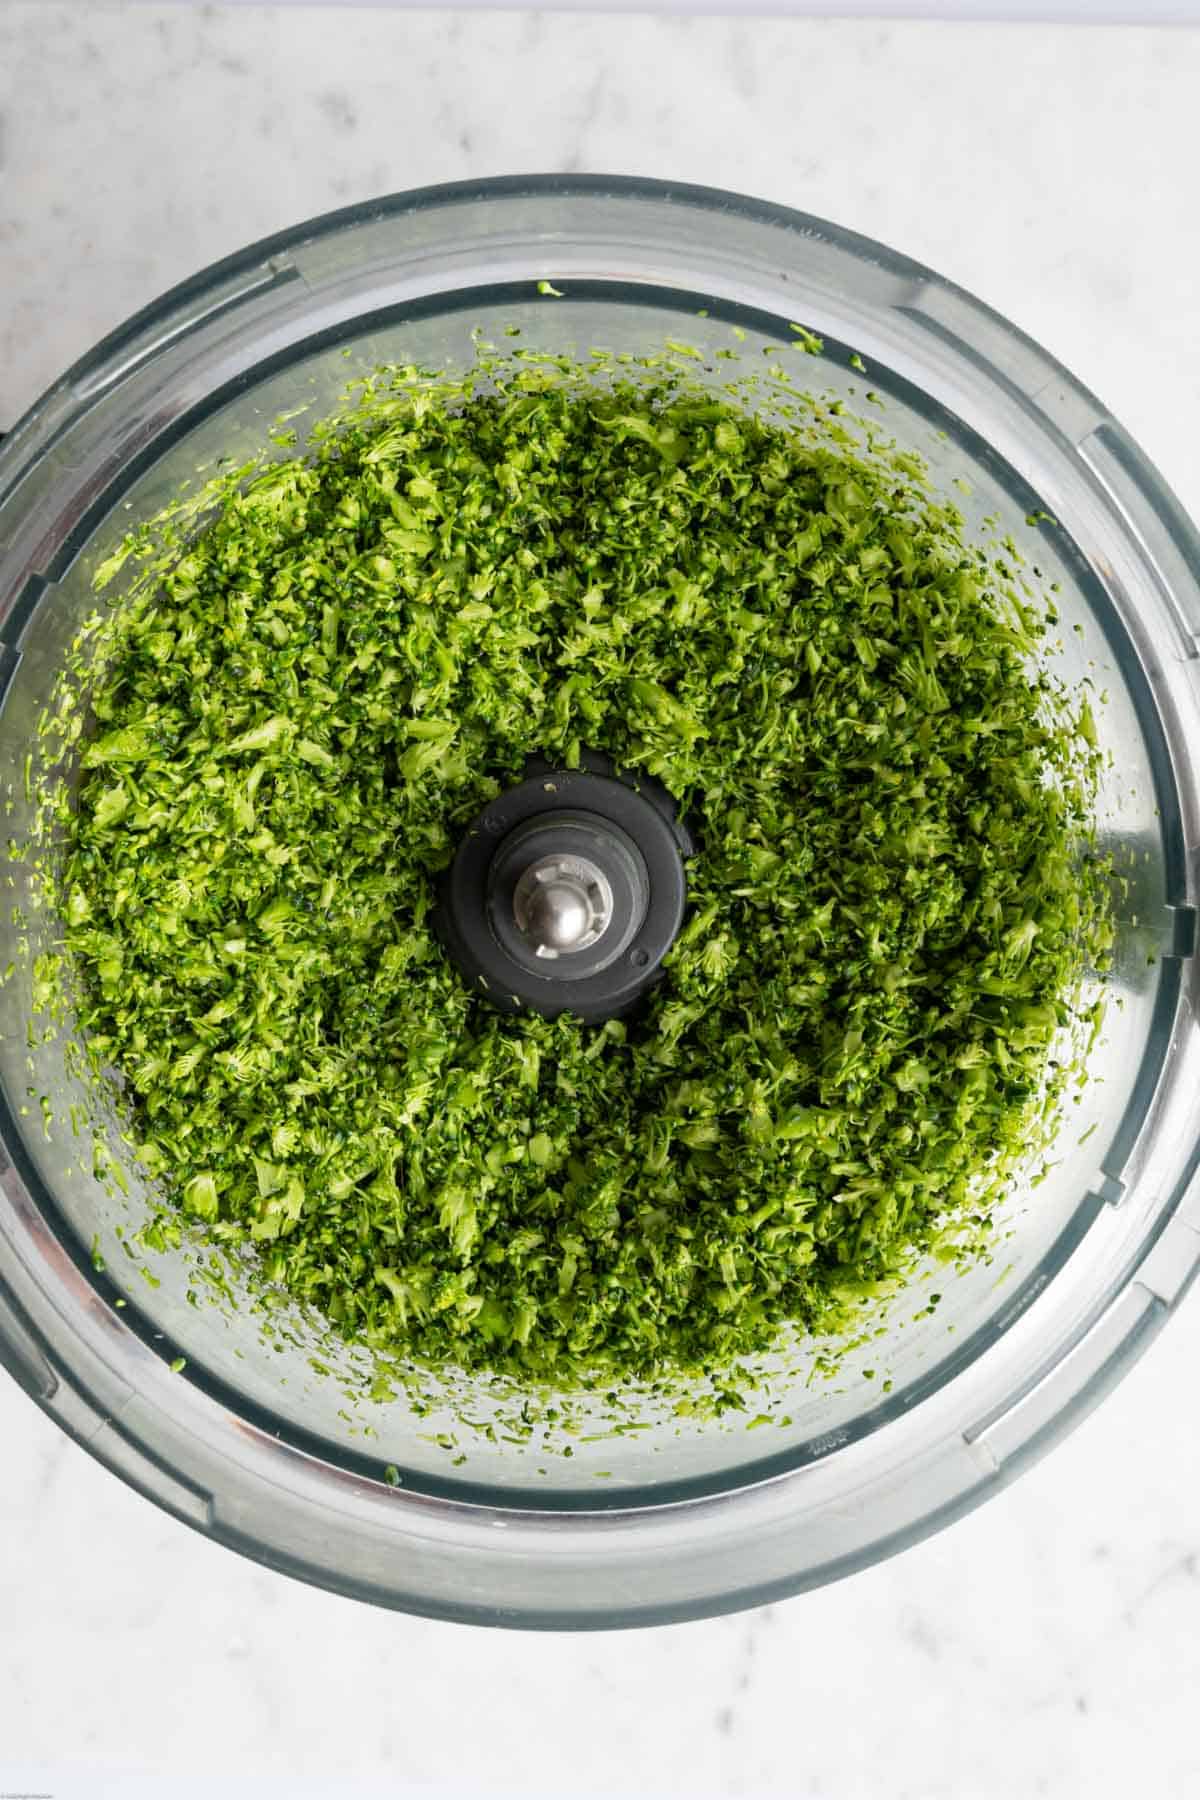 Riced broccoli is the canister of a food processor.